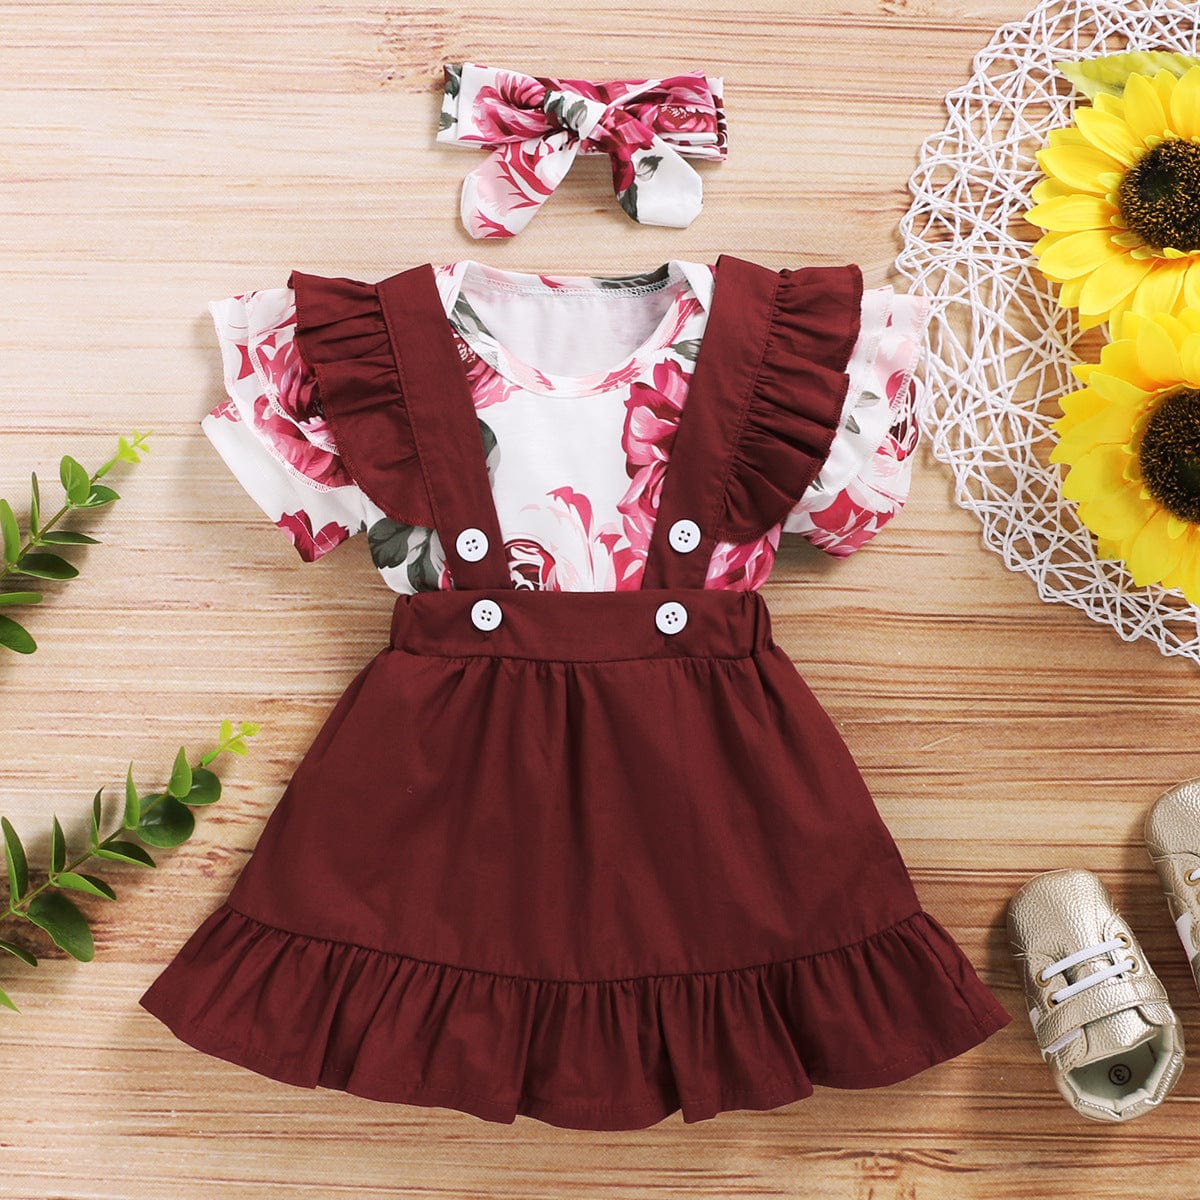 Girls spring and autumn skirt 2020 European and American new short-sleeved floral blouse + lace suspender skirt three-piece set